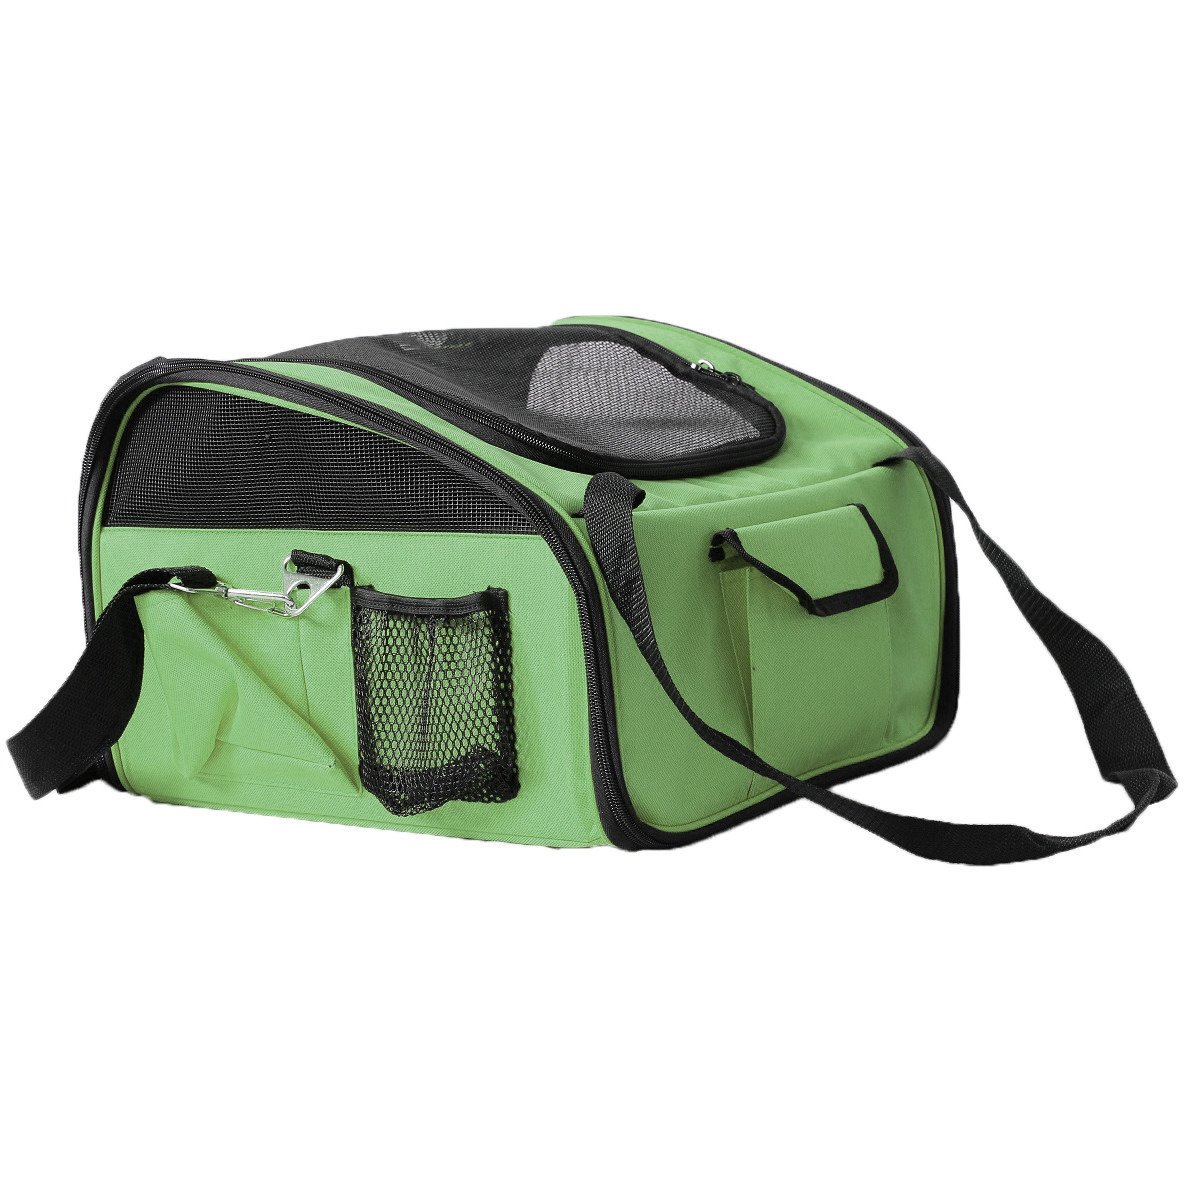 Ultra-Lock Collapsible Safety Travel Wire Folding Pet Car Seat Carrier - Green